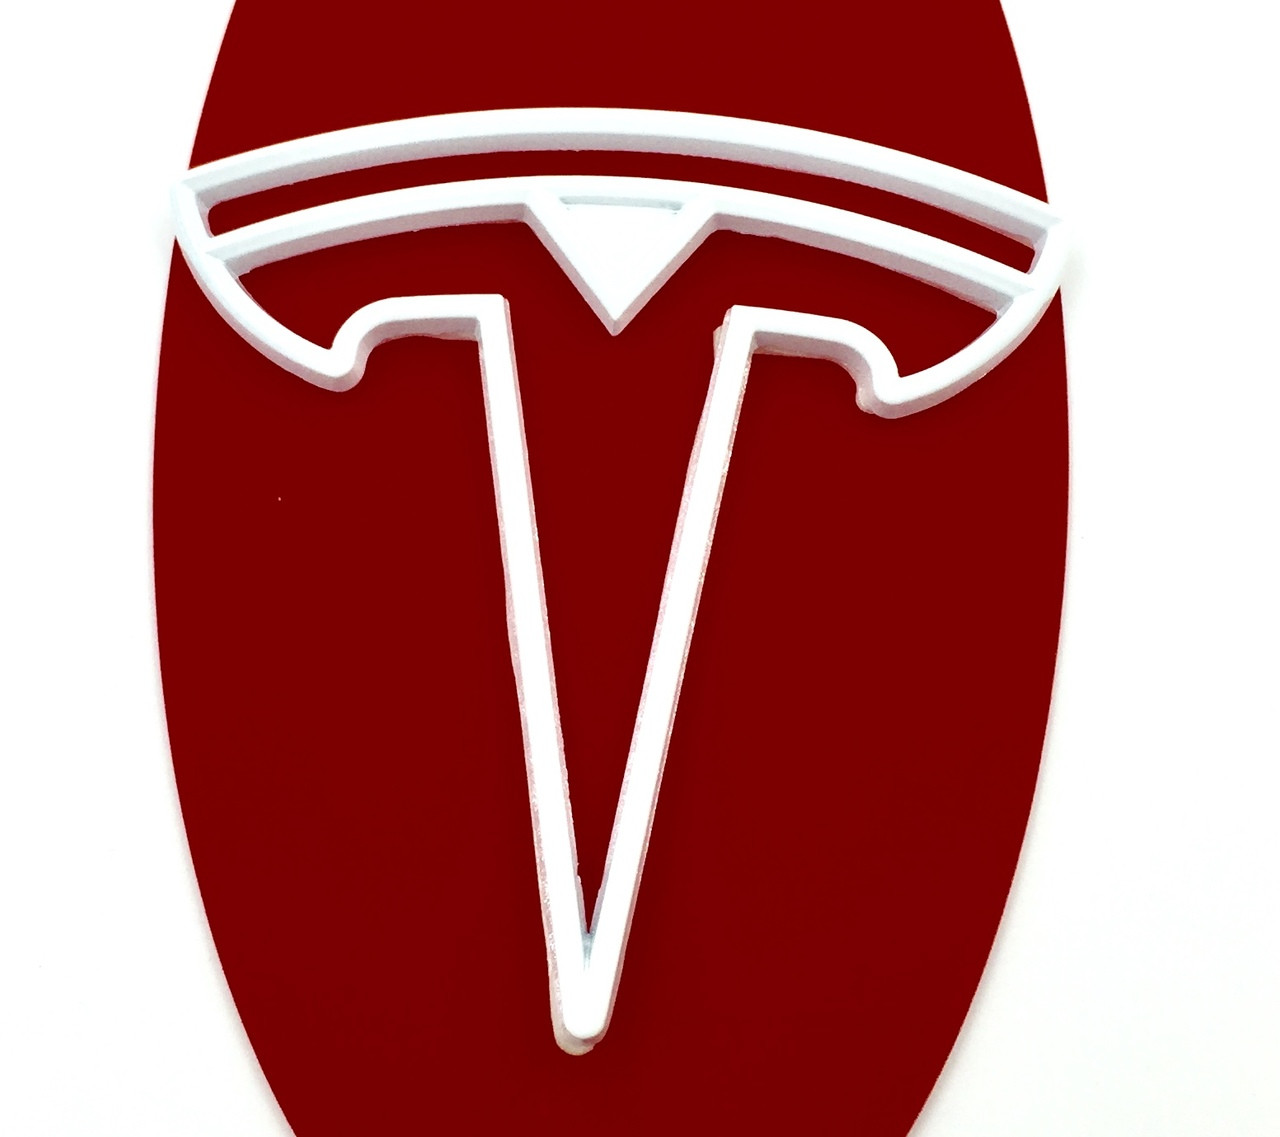 "T" Halo Badge for Model 3 Front (6 Colors)